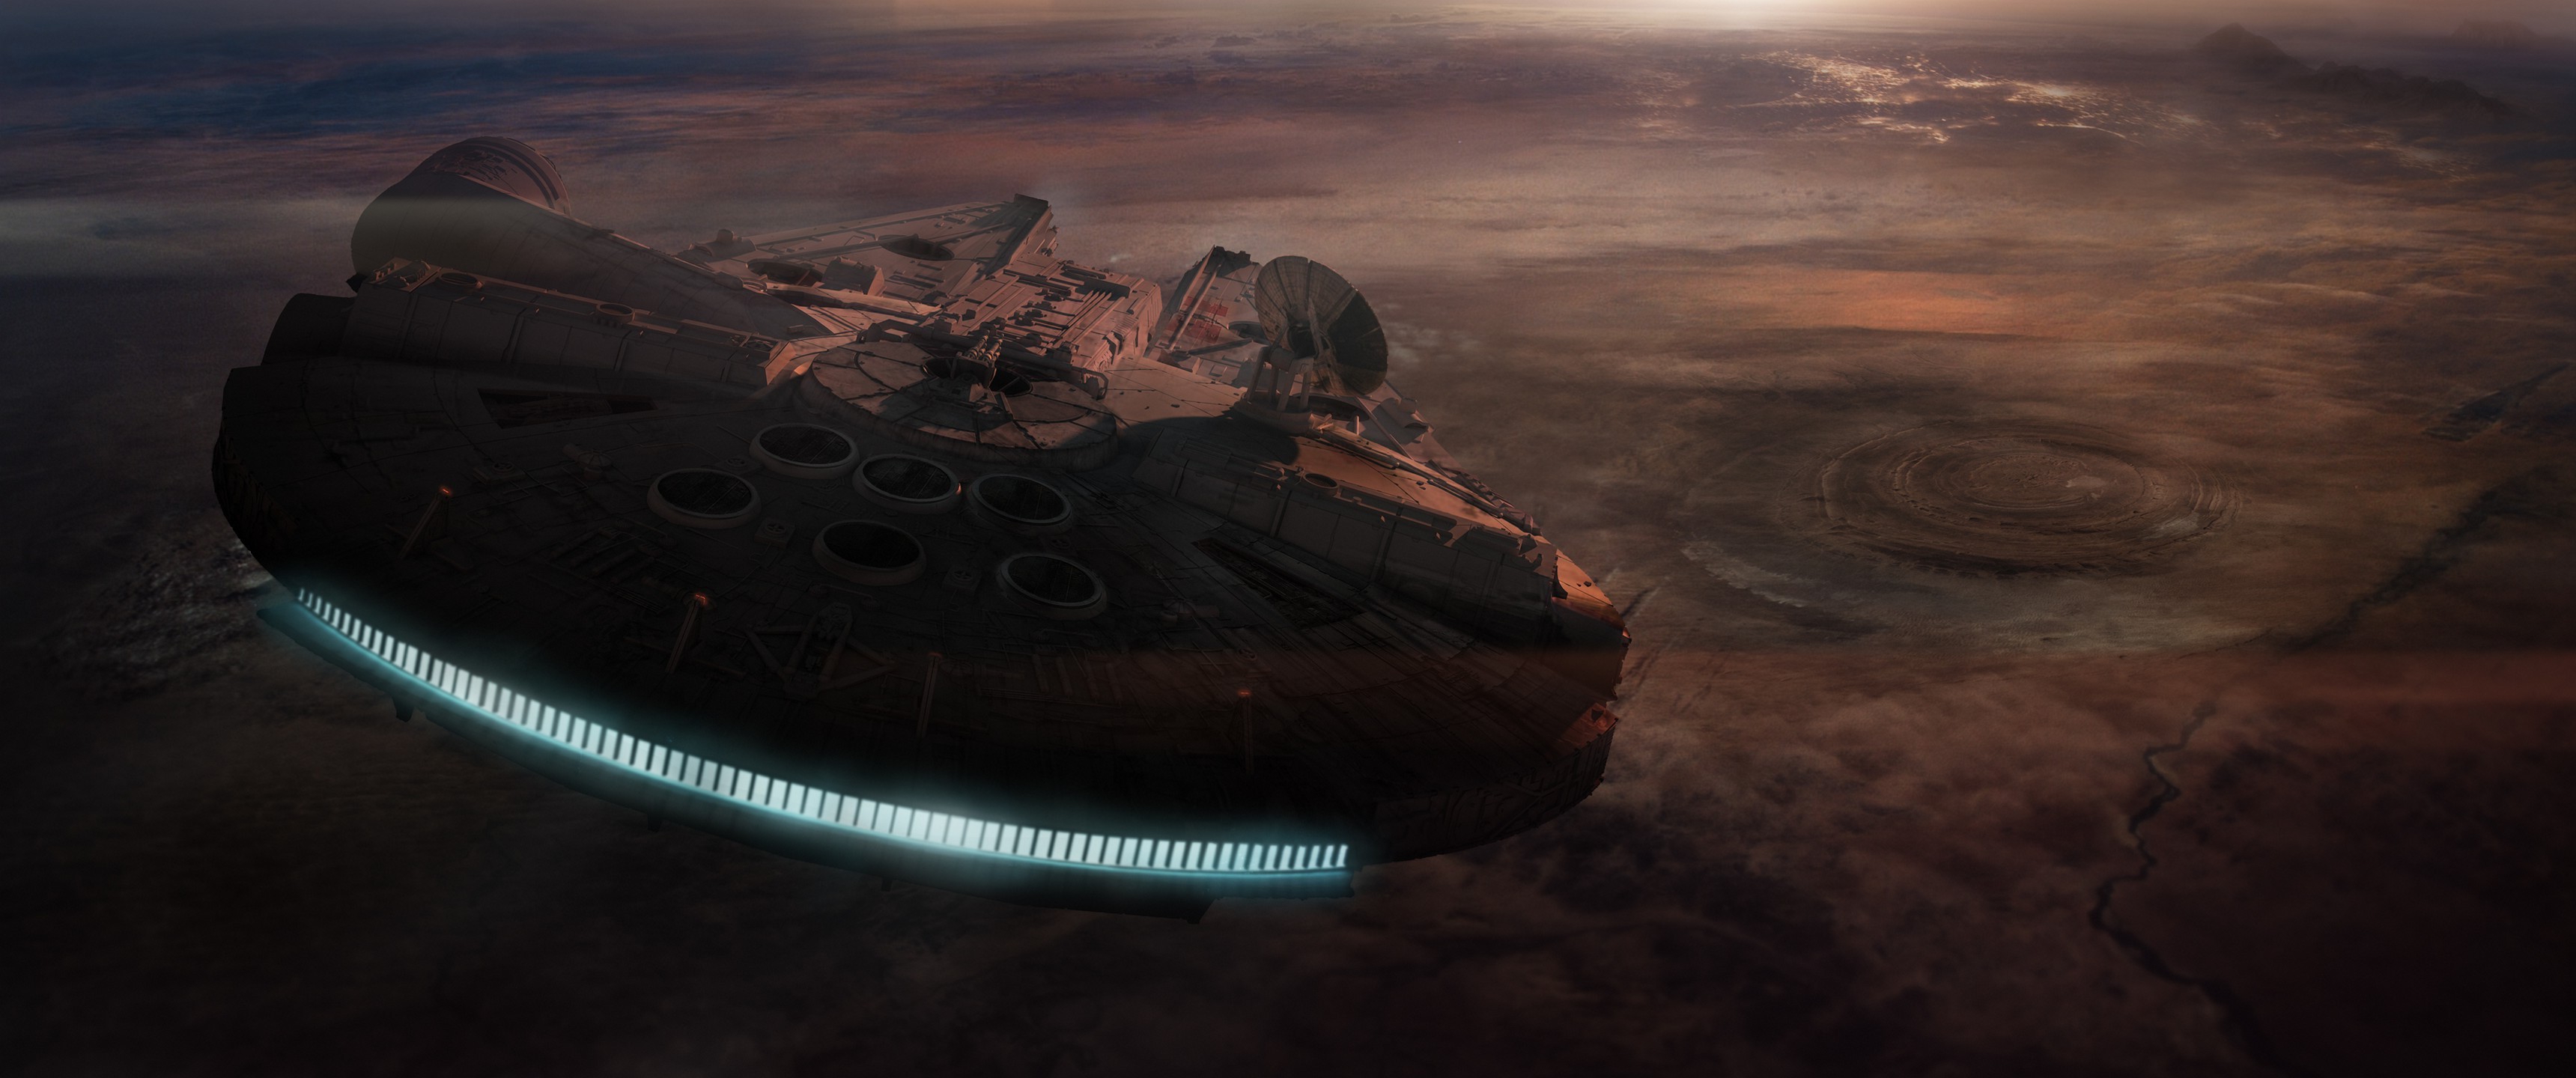 Star Wars, Millennium Falcon Wallpapers HD / Desktop and Mobile ...